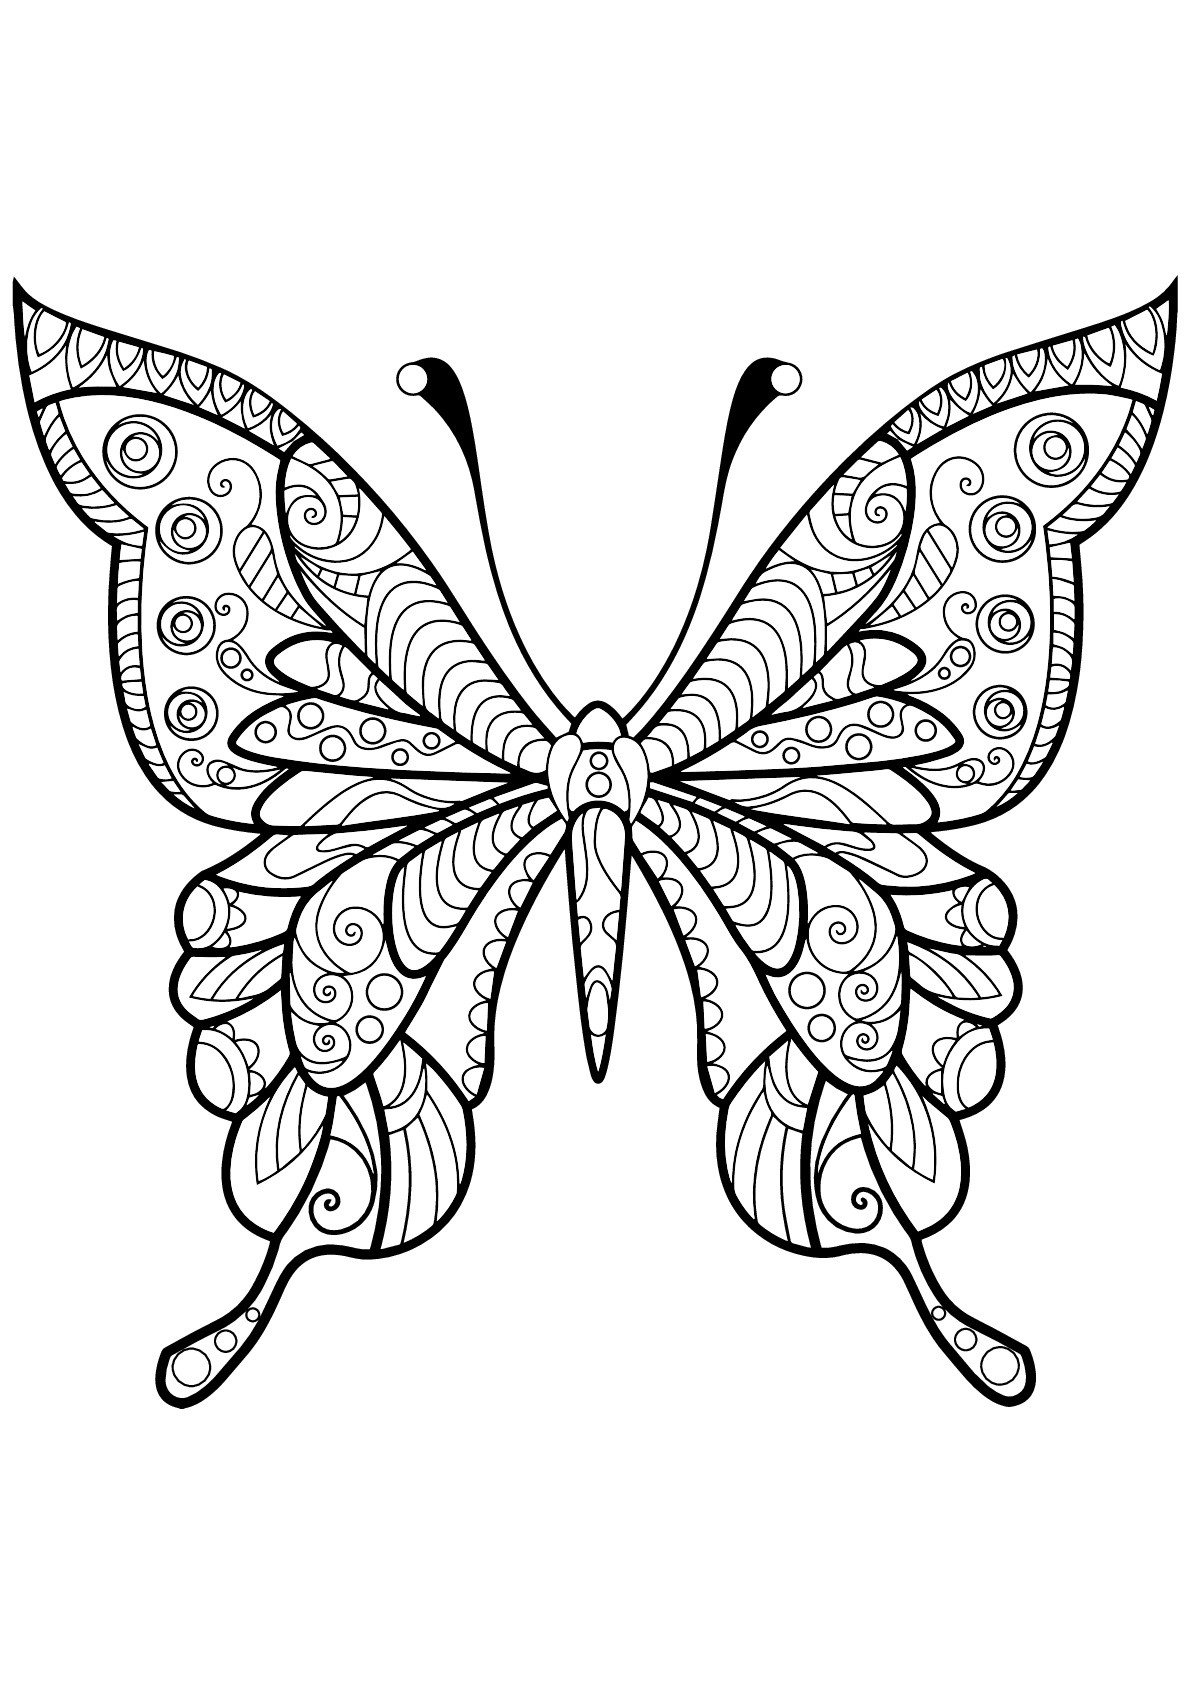 Free Printable Butterfly Coloring Pages Adults
 Butterfly Coloring Pages for Adults Best Coloring Pages